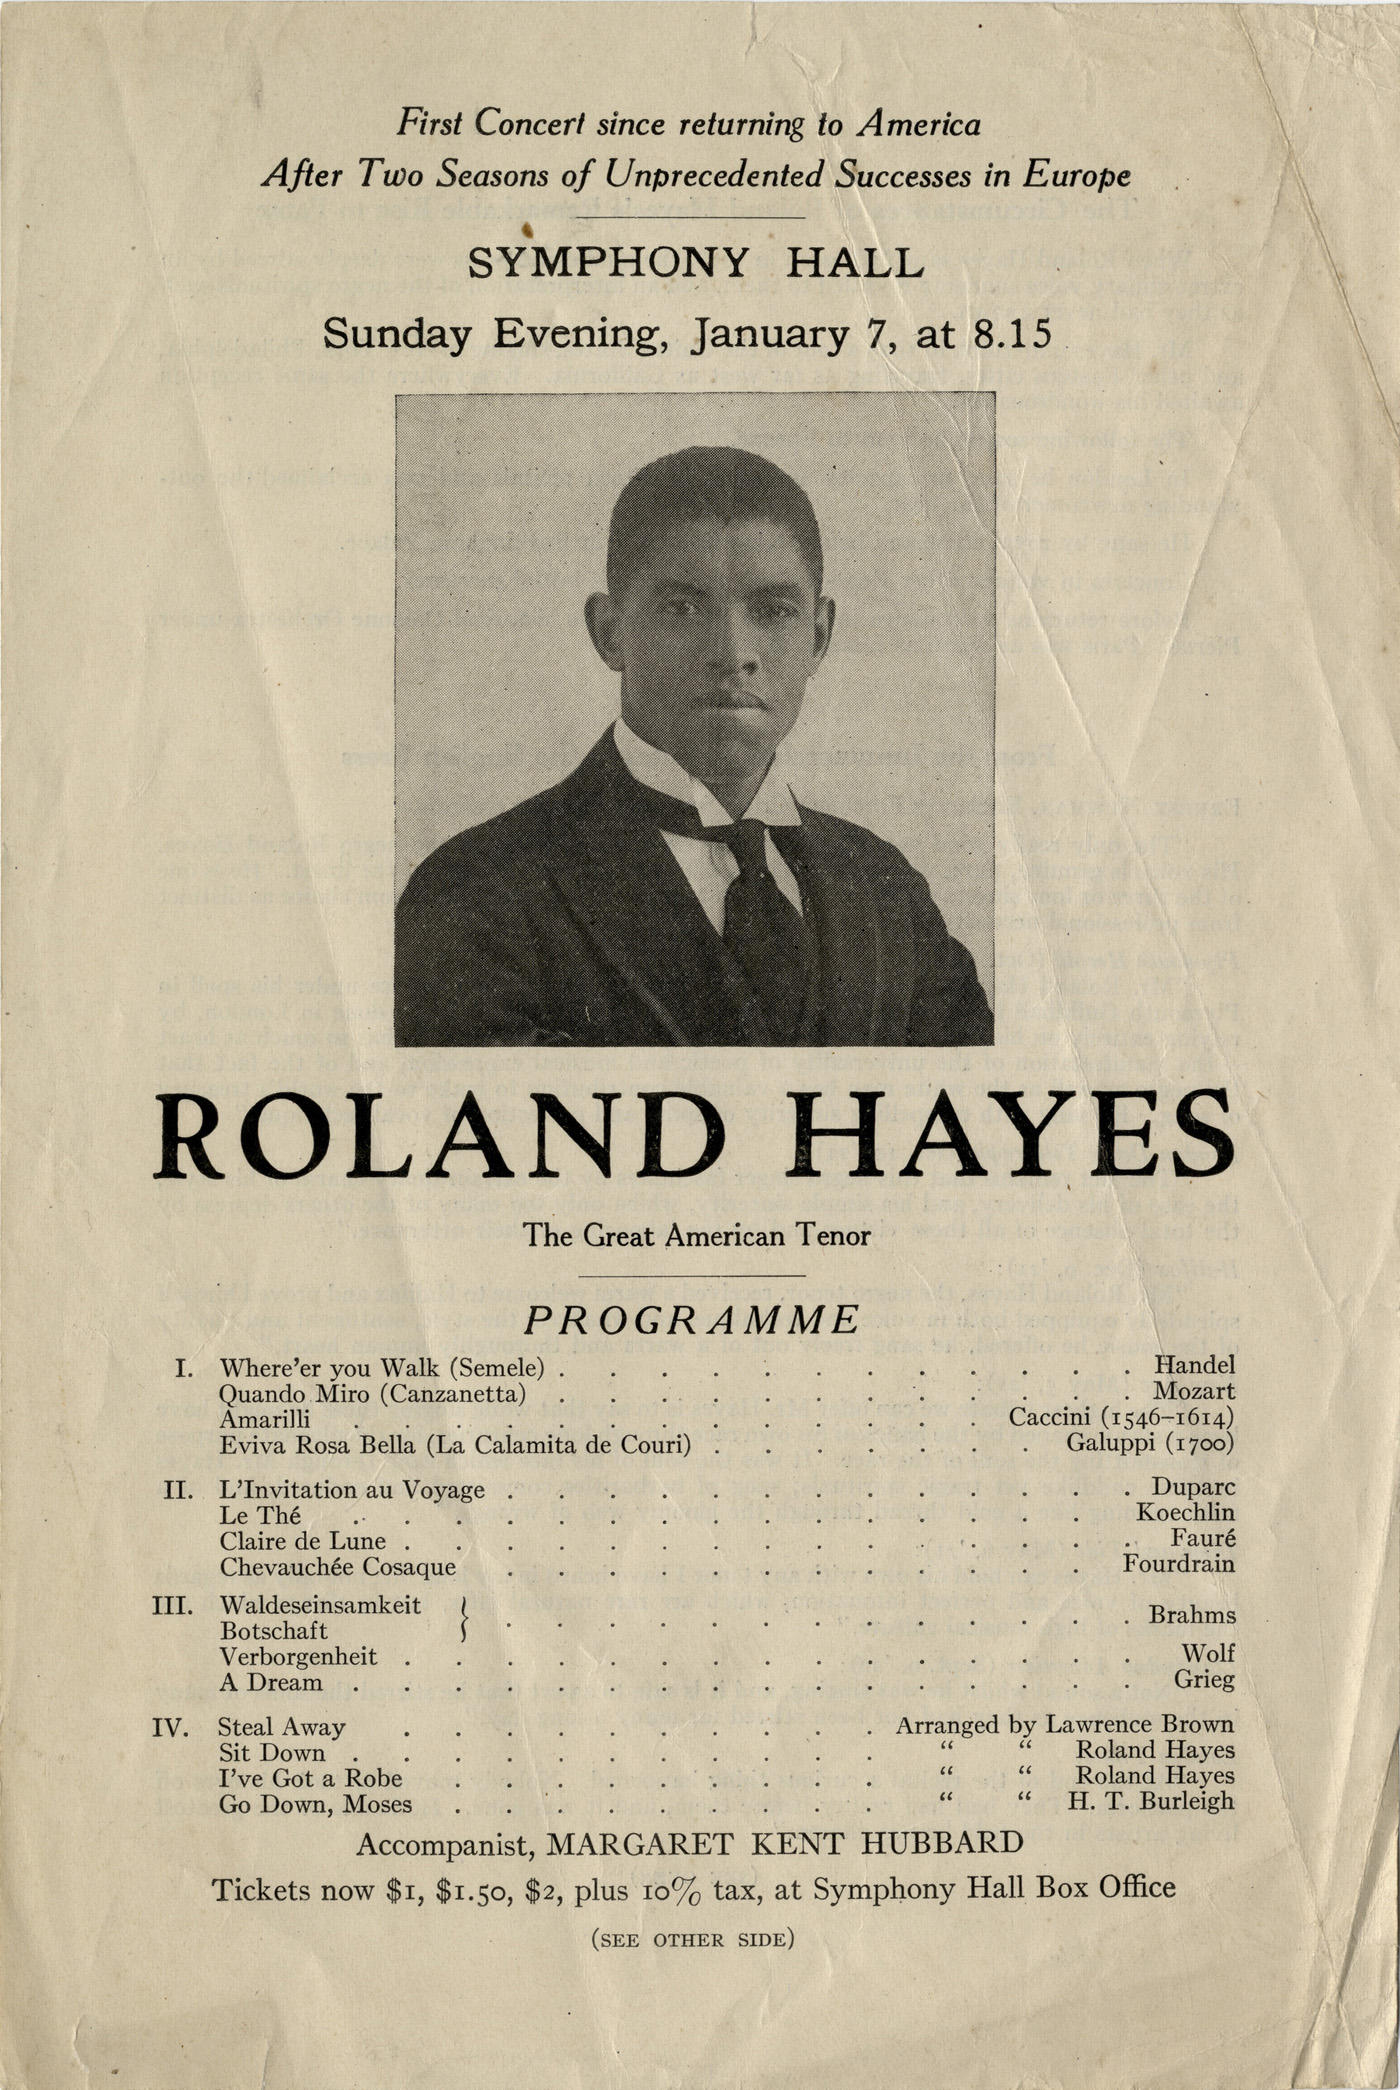 Printed description of Boston Symphony Orchestra music program containing a portrait of Roland Hayes as a young man. 